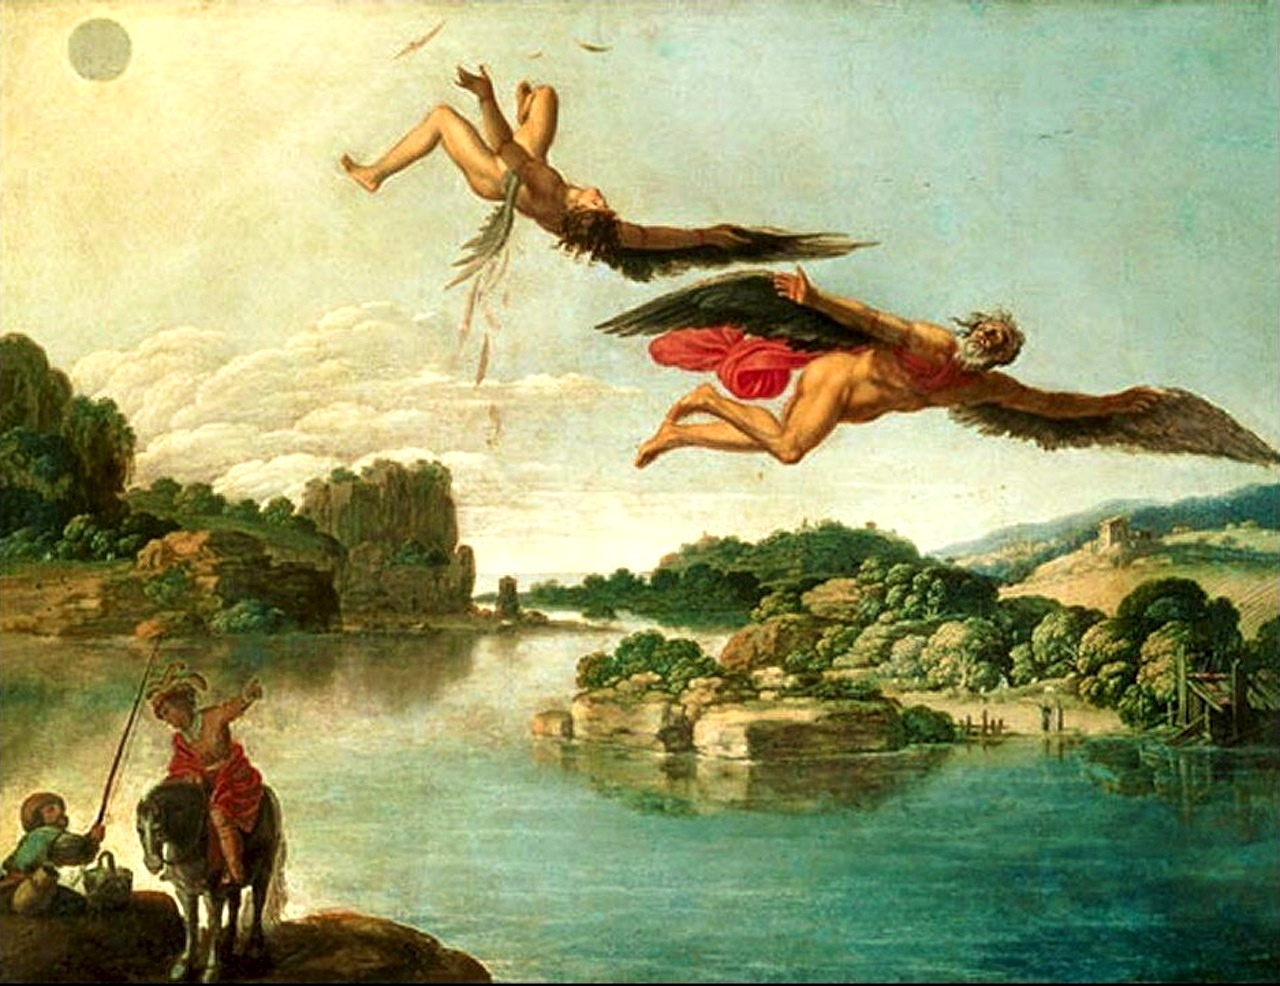 messages in the daedalus and icarus story